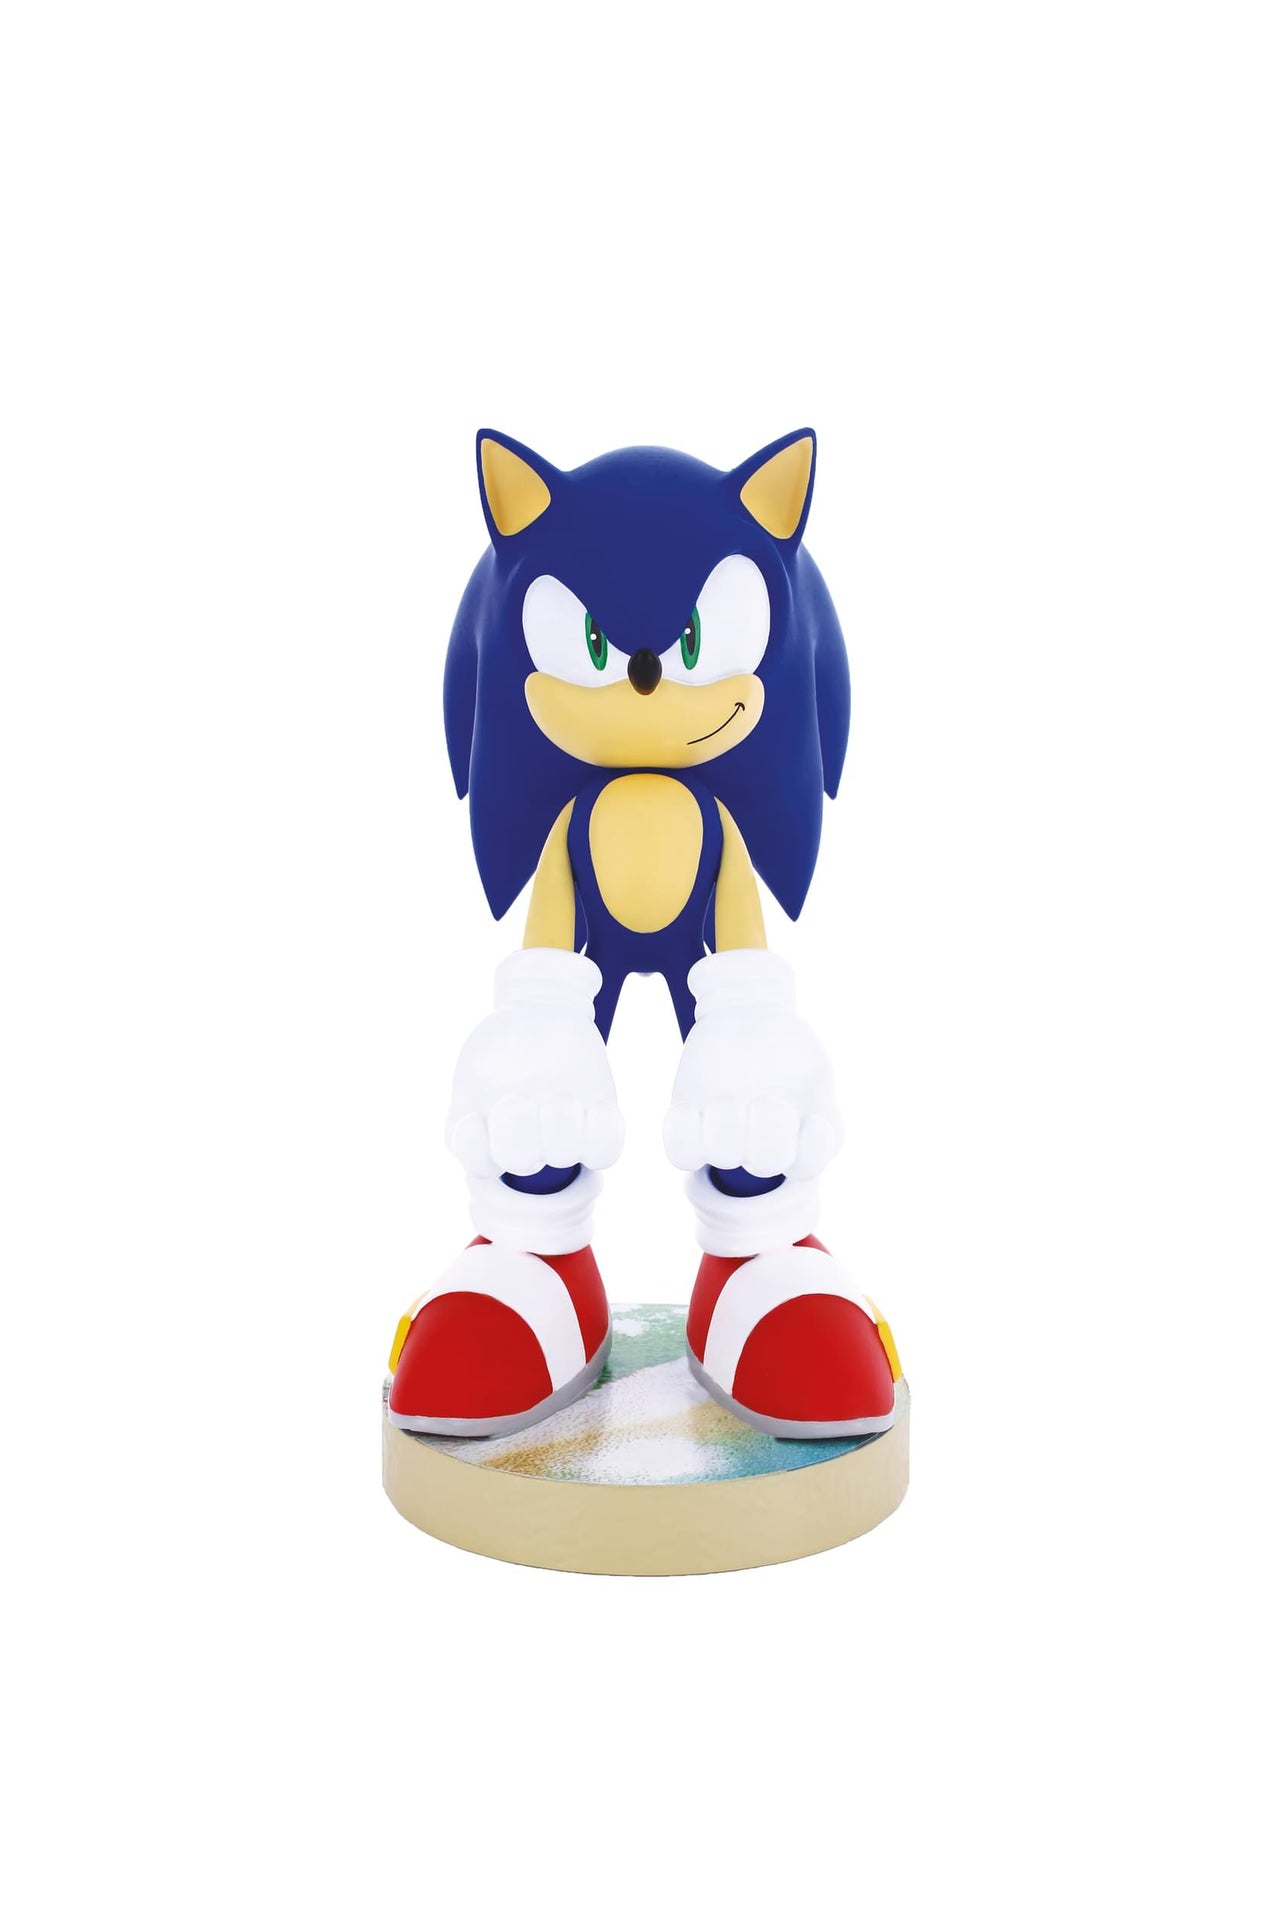 Modern Sonic Cable Guy Phone and Controller Holder Available for Pre-Order  – Sonic City